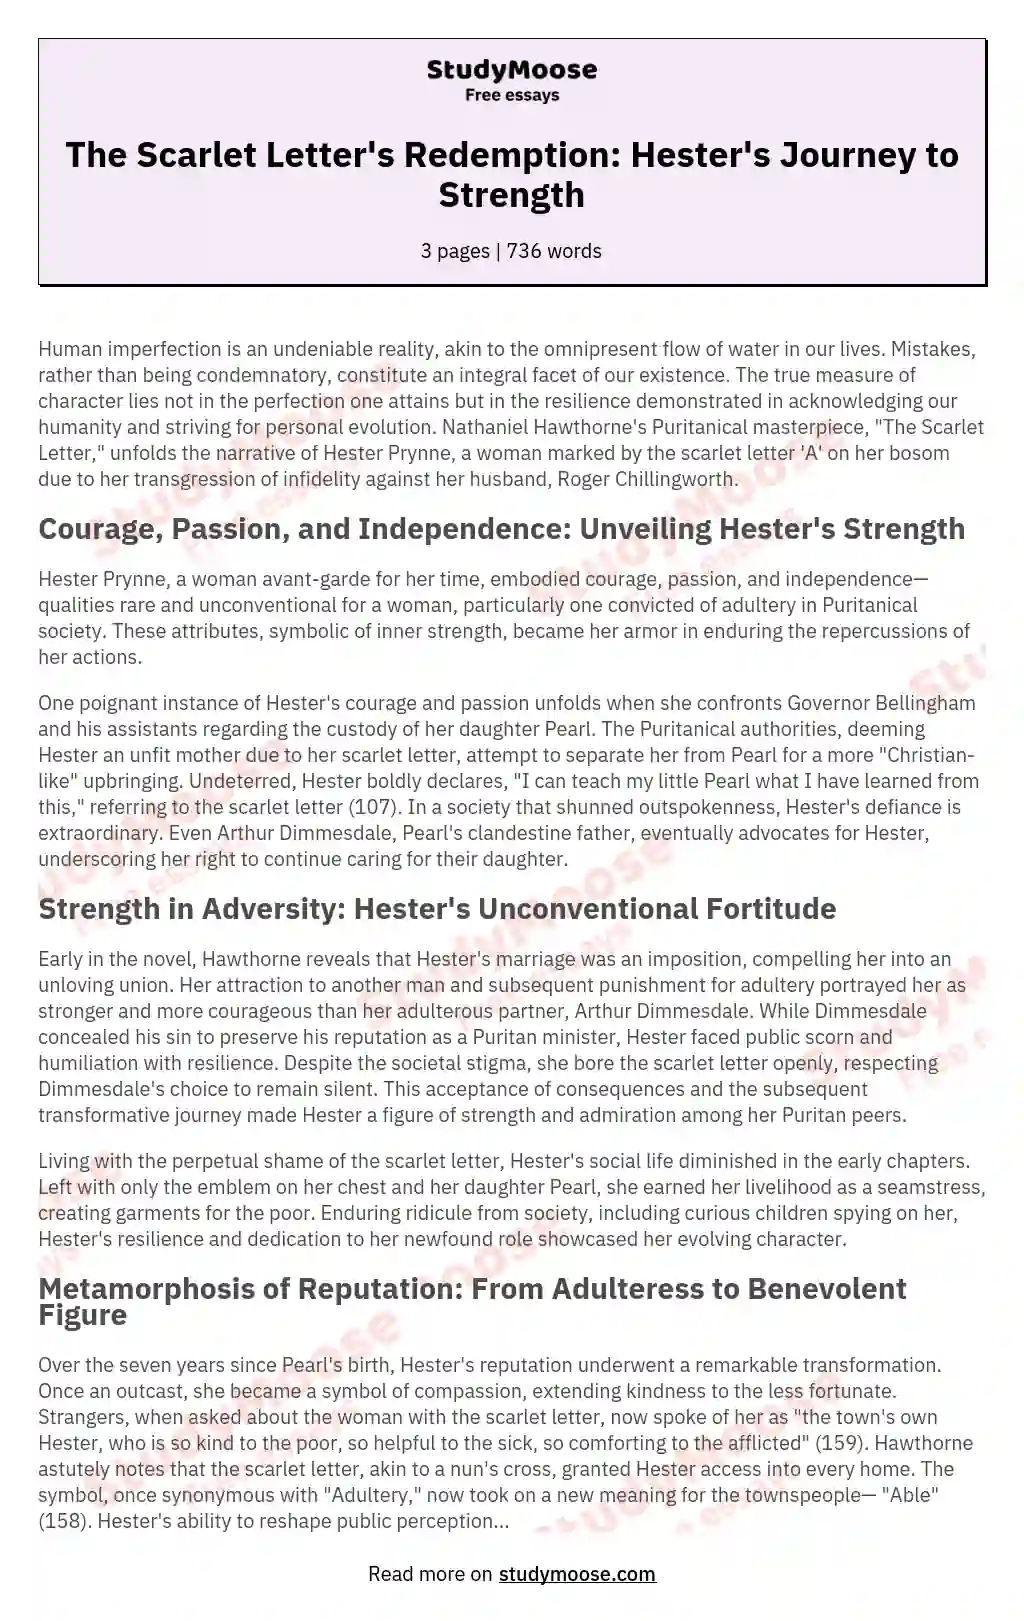 The Scarlet Letter's Redemption: Hester's Journey to Strength essay